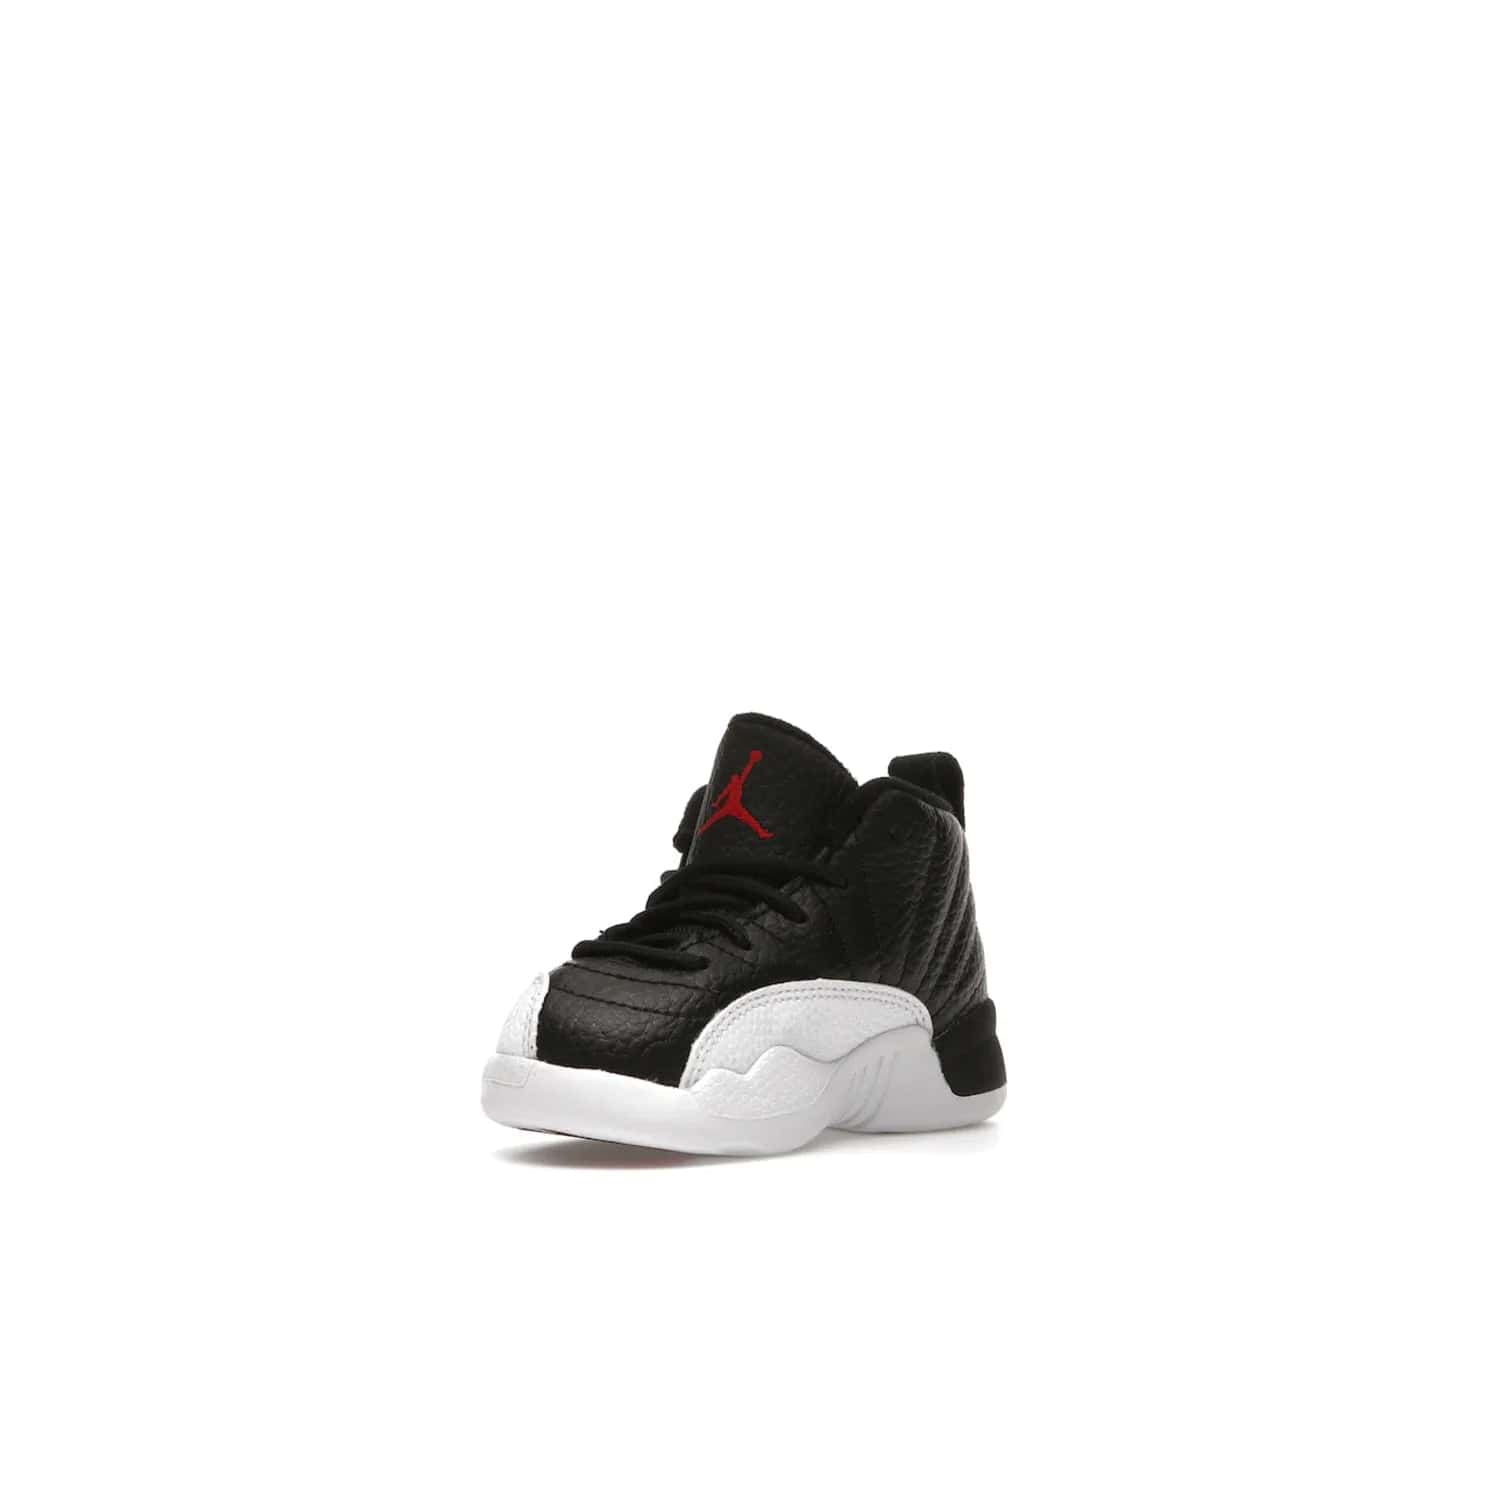 Jordan 12 Retro Playoffs (2022) (TD) - Image 14 - Only at www.BallersClubKickz.com - Stay stylish with the Air Jordan 12 Retro Playoffs 2022 (TD) toddler shoe. All-black upper with red and white accents plus subtle gold details. Bright white midsole and sole. Perfect for any outing or special event.